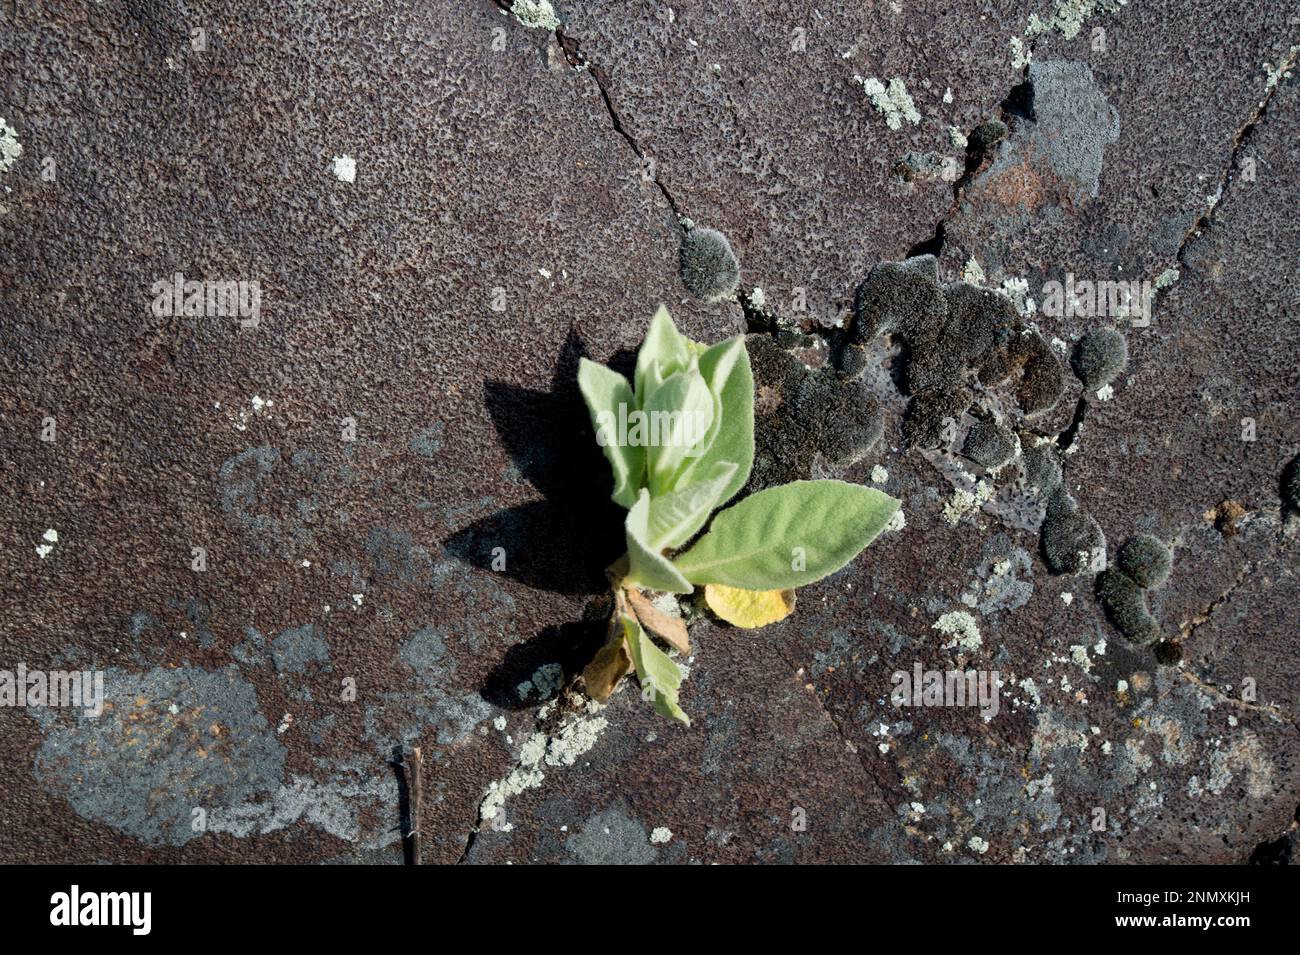 Young wooly mullein (Verbascum thapsus) growing in crack in a basalt boulder in SW Idaho Stock Photo